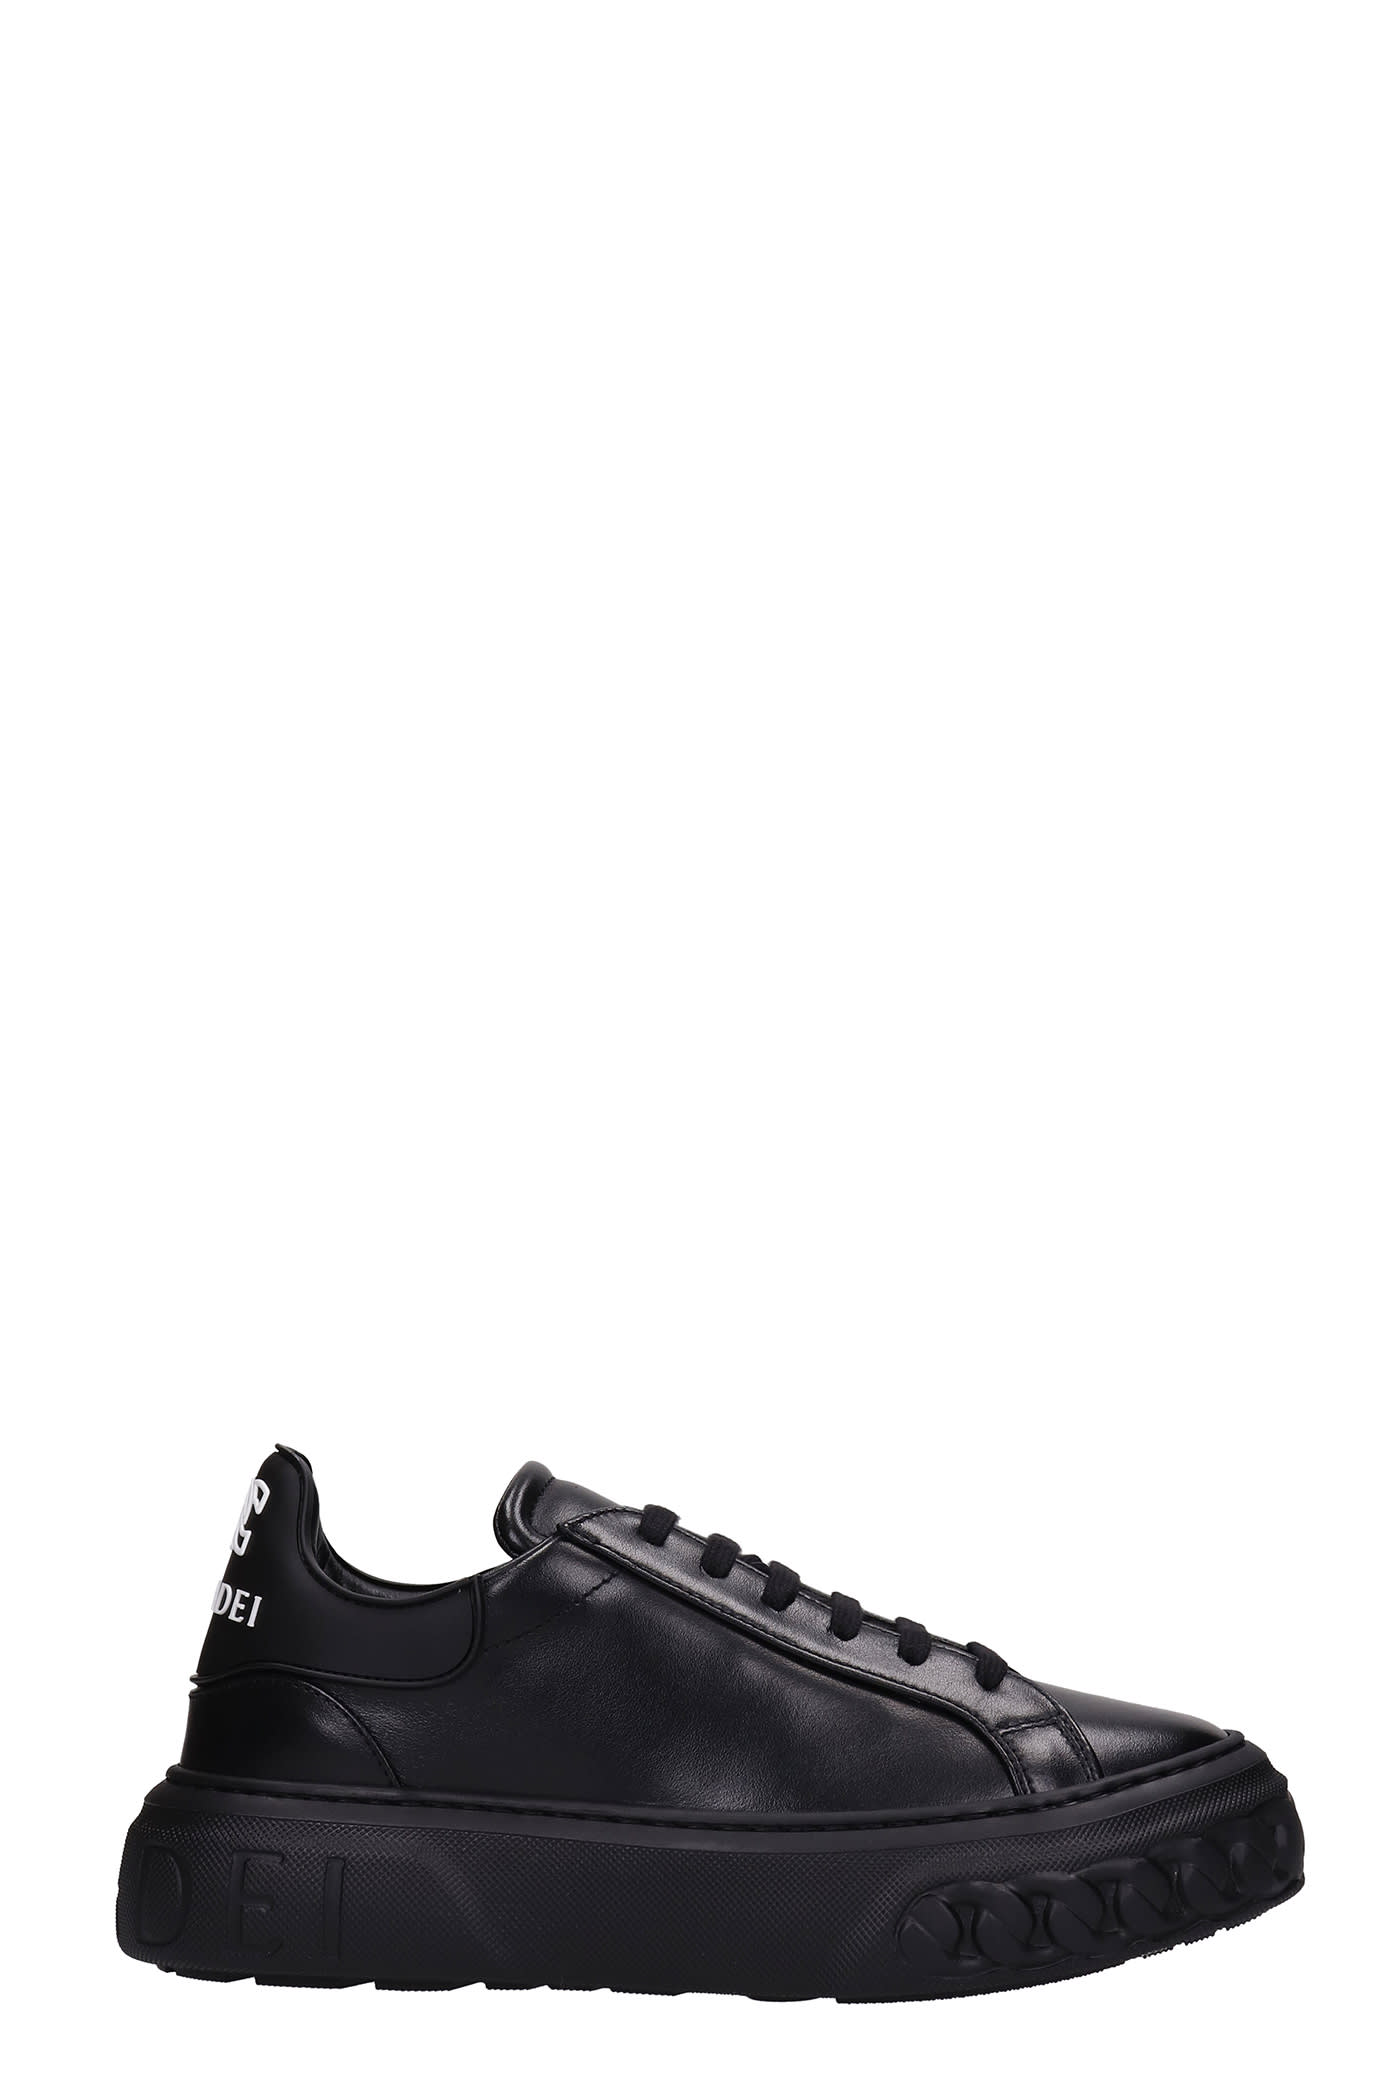 Casadei Off Road Sneakers In Black Leather